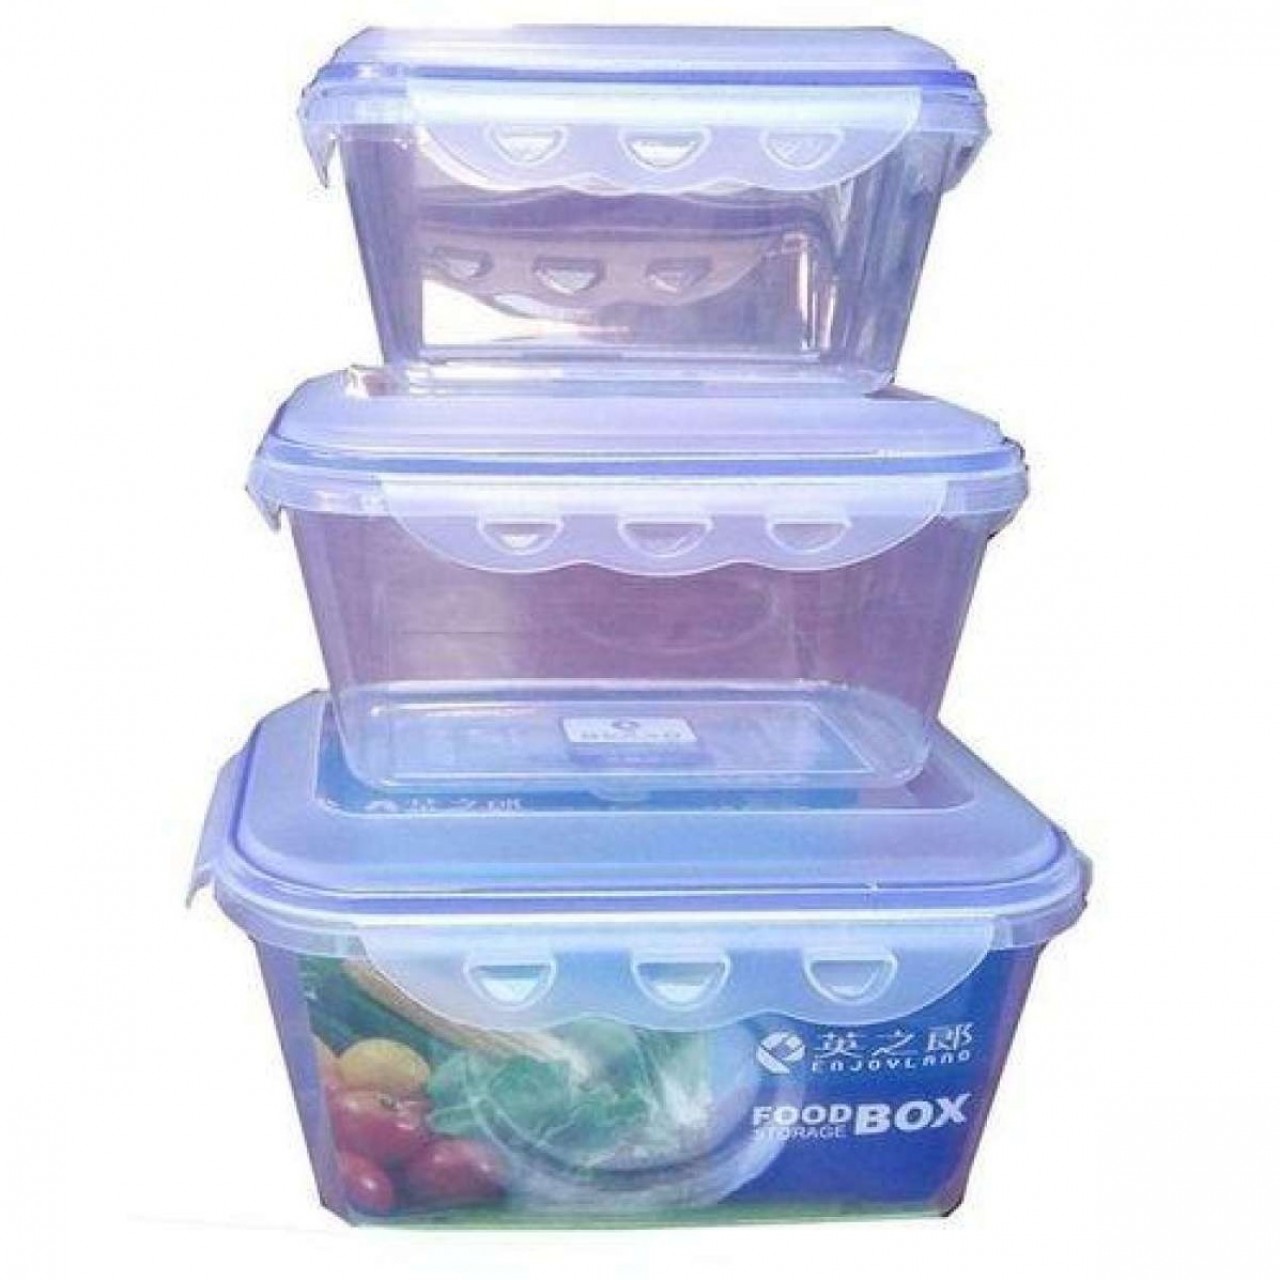 Freezer Boxes - Plastic - Pack of 3